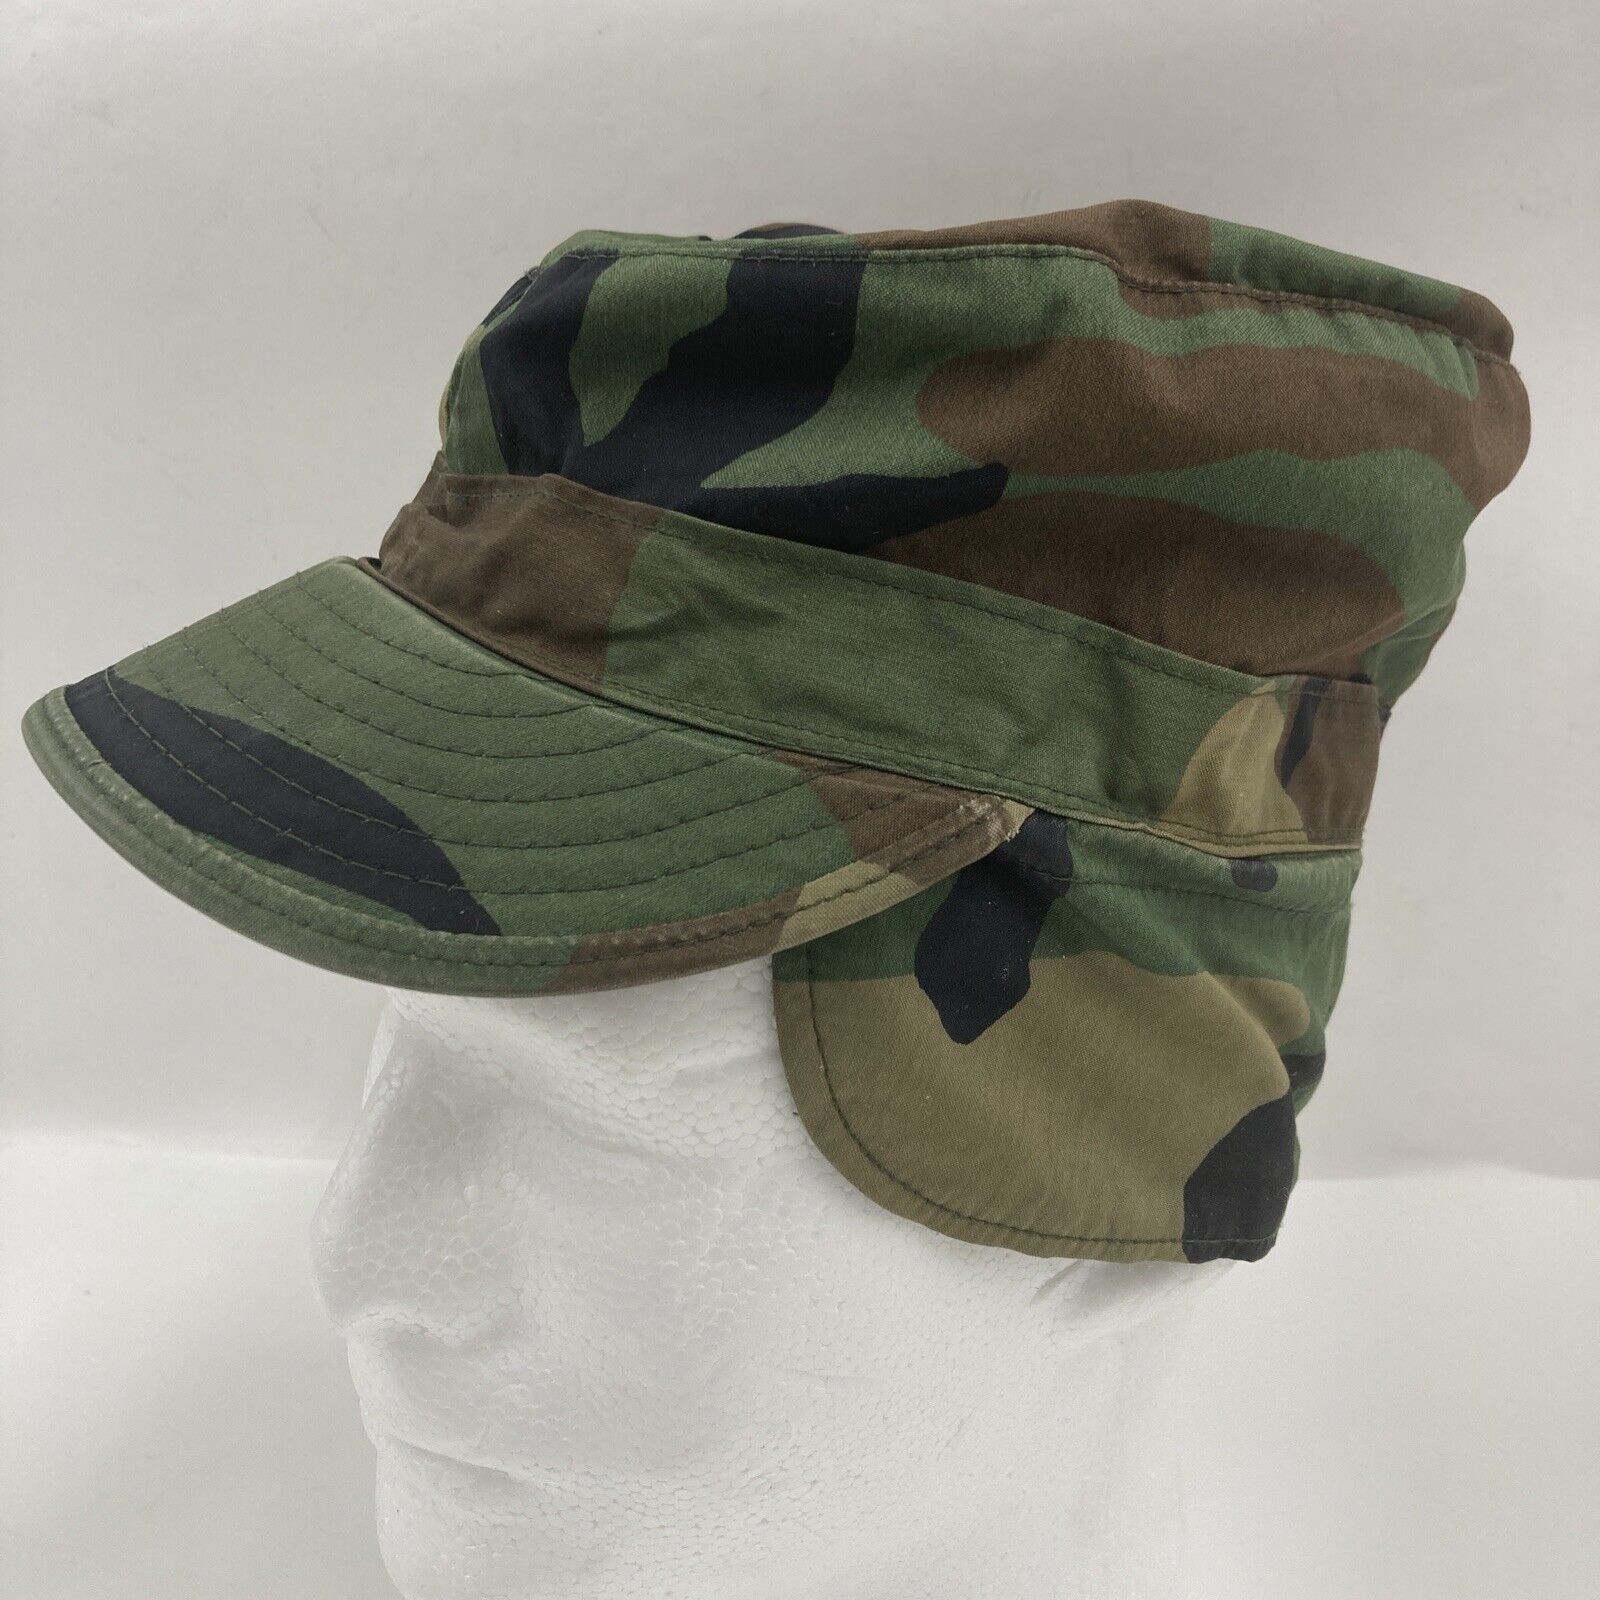 Vintage US Military Woodland Cap, Camouflage Pattern, Class1 Size 7-1/8